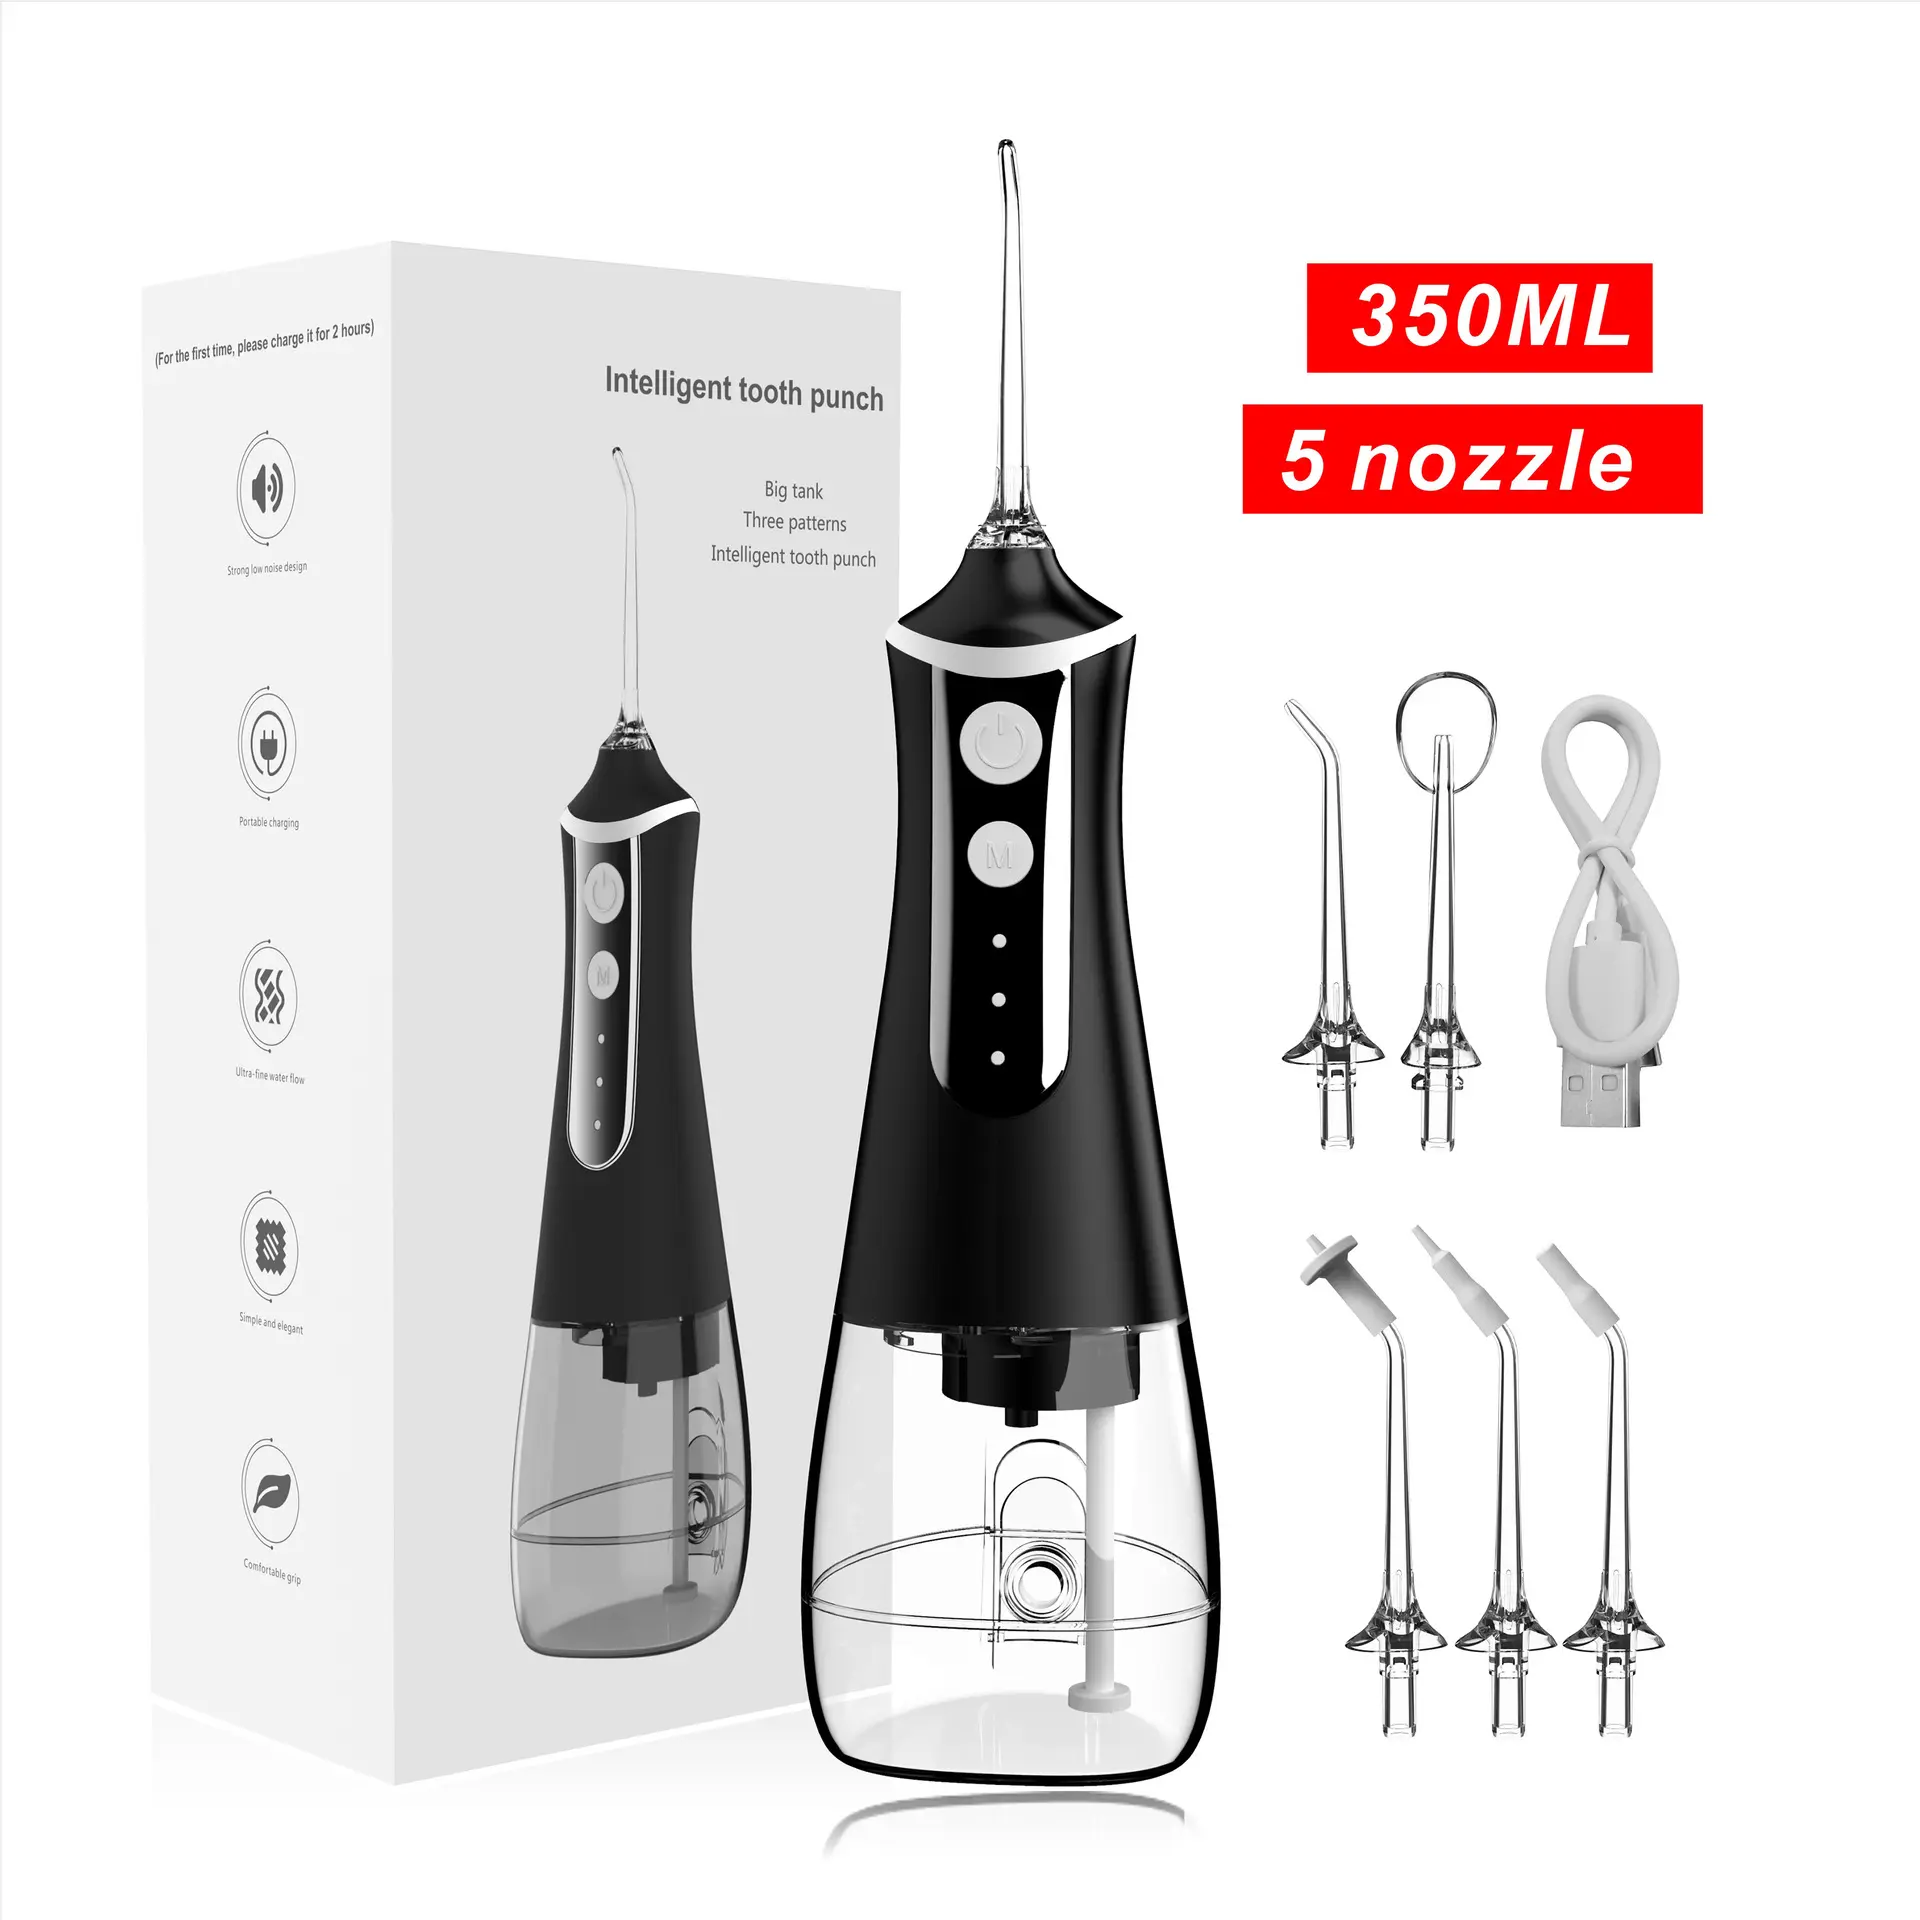 Amazon FBA Portable USB Rechargeable Dental 5 Mode 350ml Oral Irrigator Home Travel Water Flosser